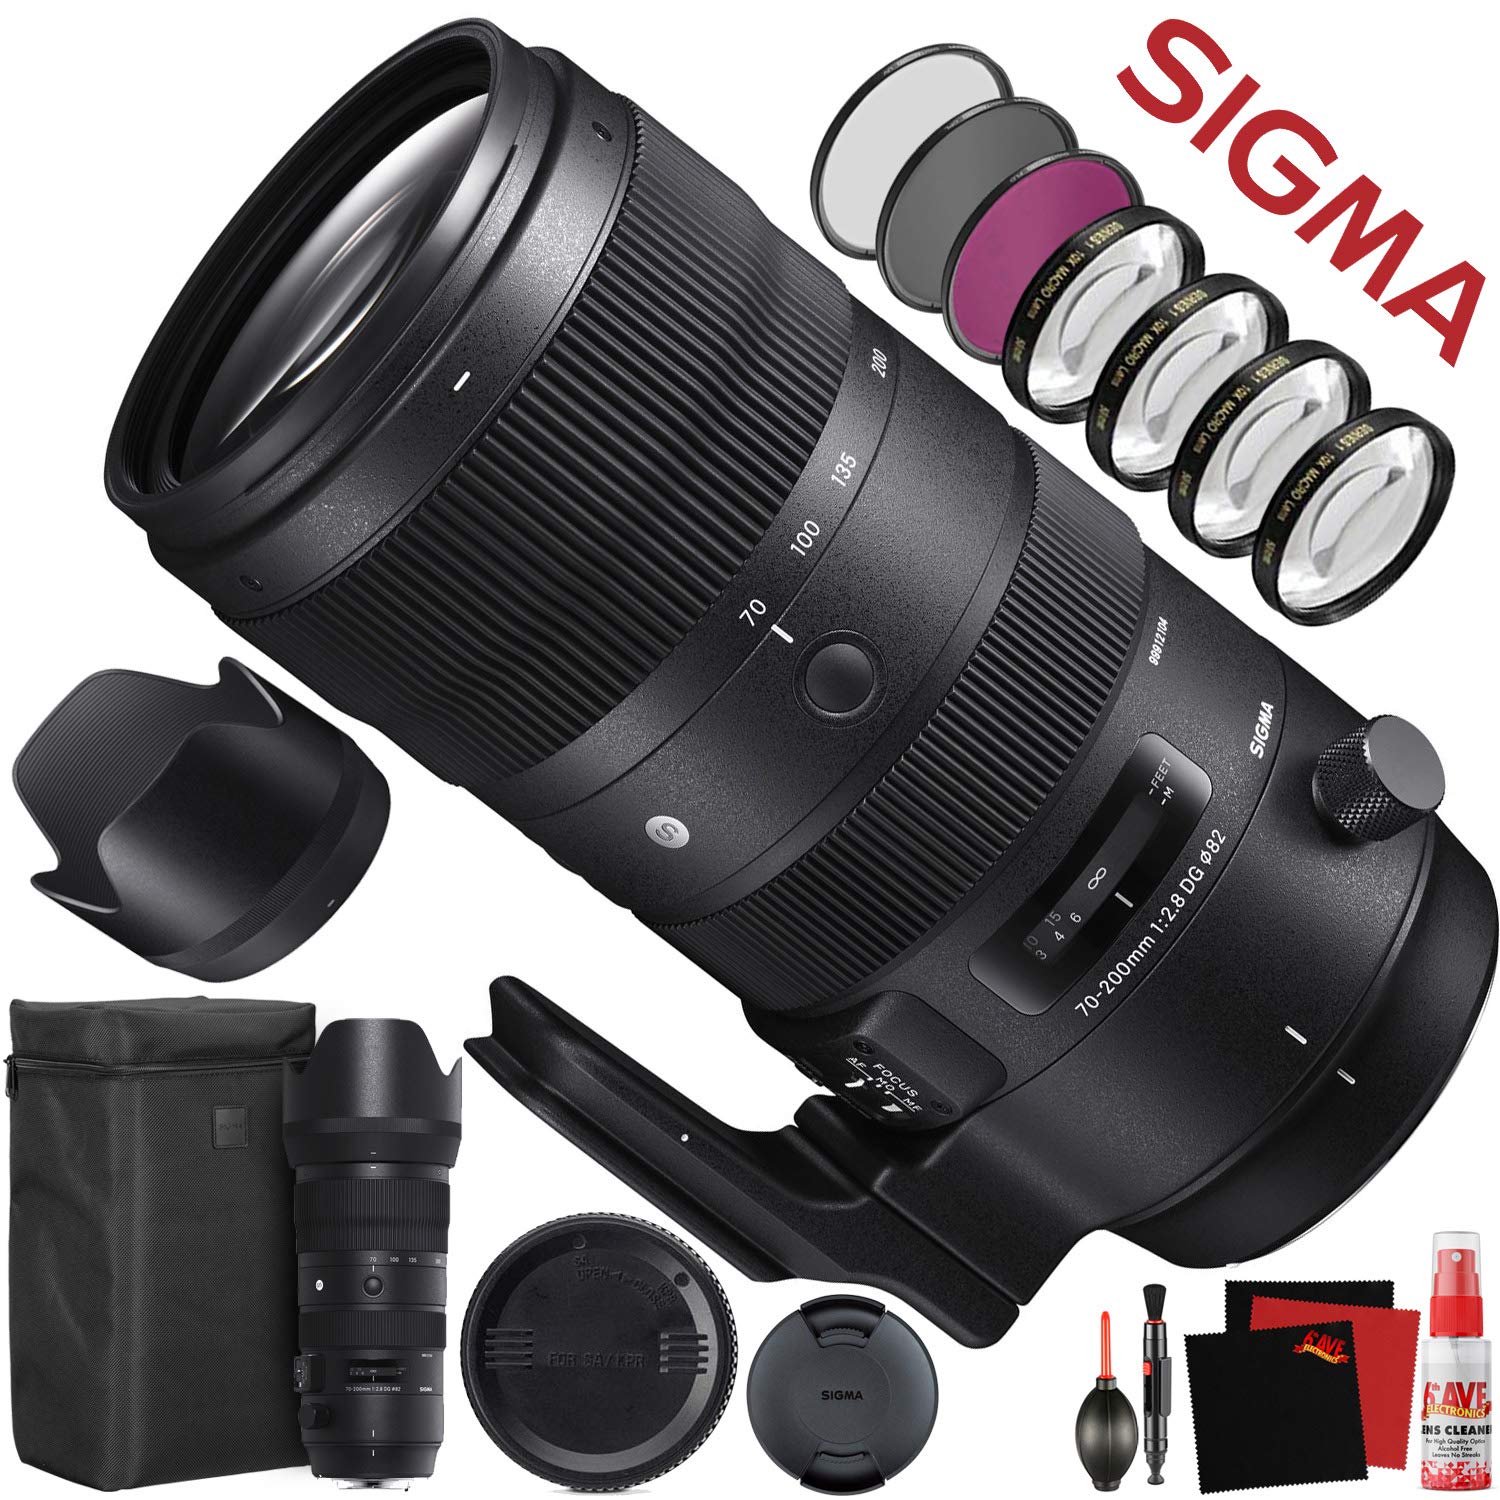 Sigma 70-200mm f/2.8 DG OS HSM Sports Lens for Nikon F  (590955)  With FLD Filter, CPL Filter, UV Filter - Close Up Filter Kit and Cleaning Accessories Bundle